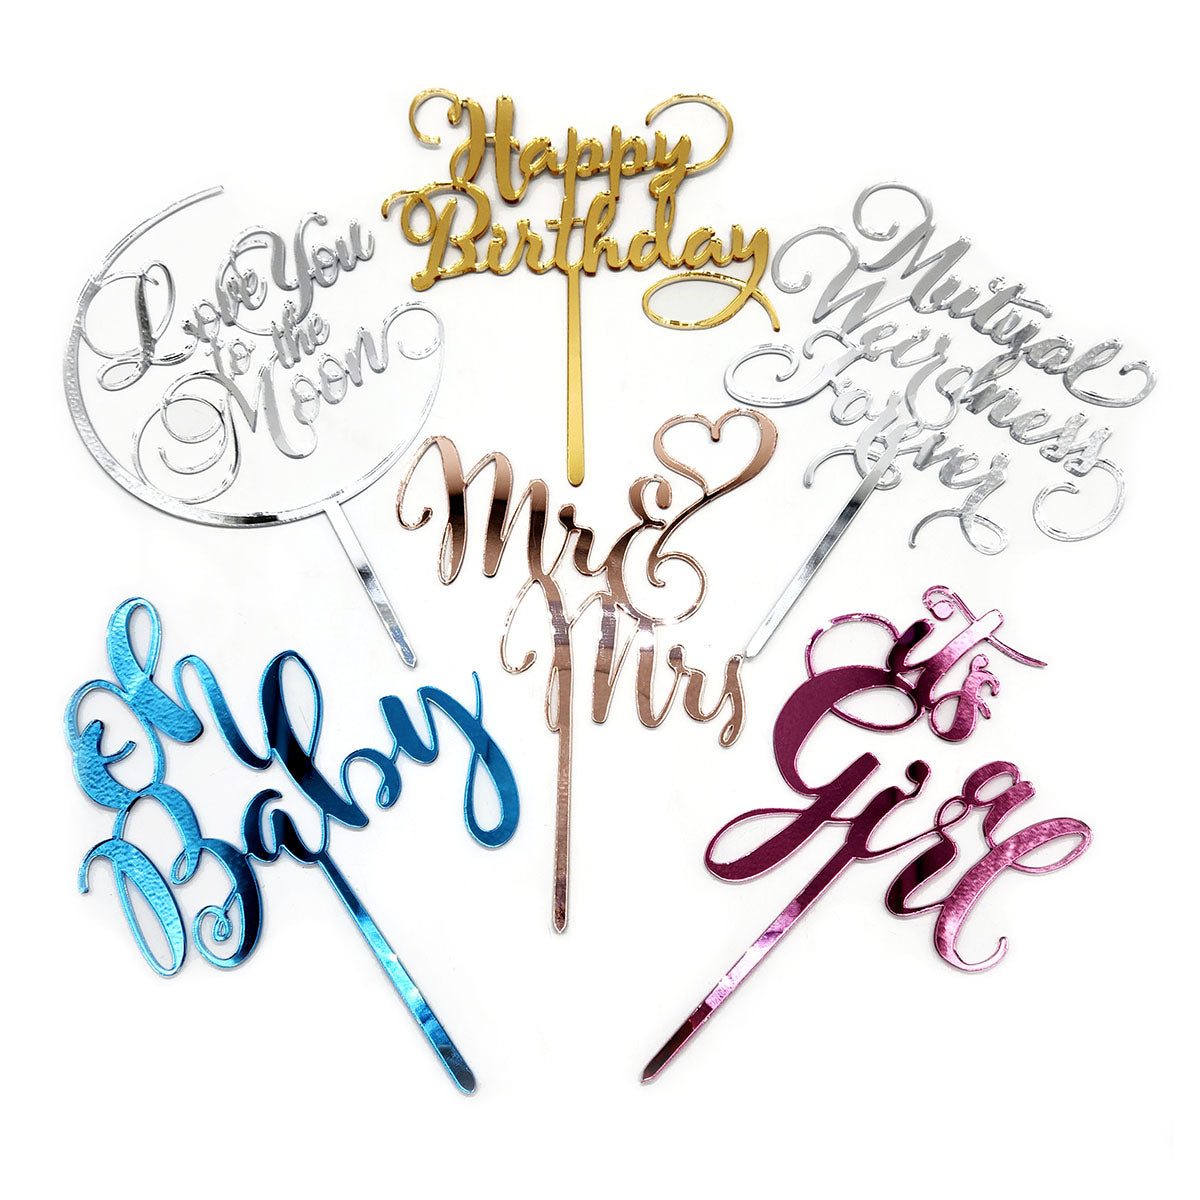 Black Birthday Cake Topper Printable Template | PosterMyWall